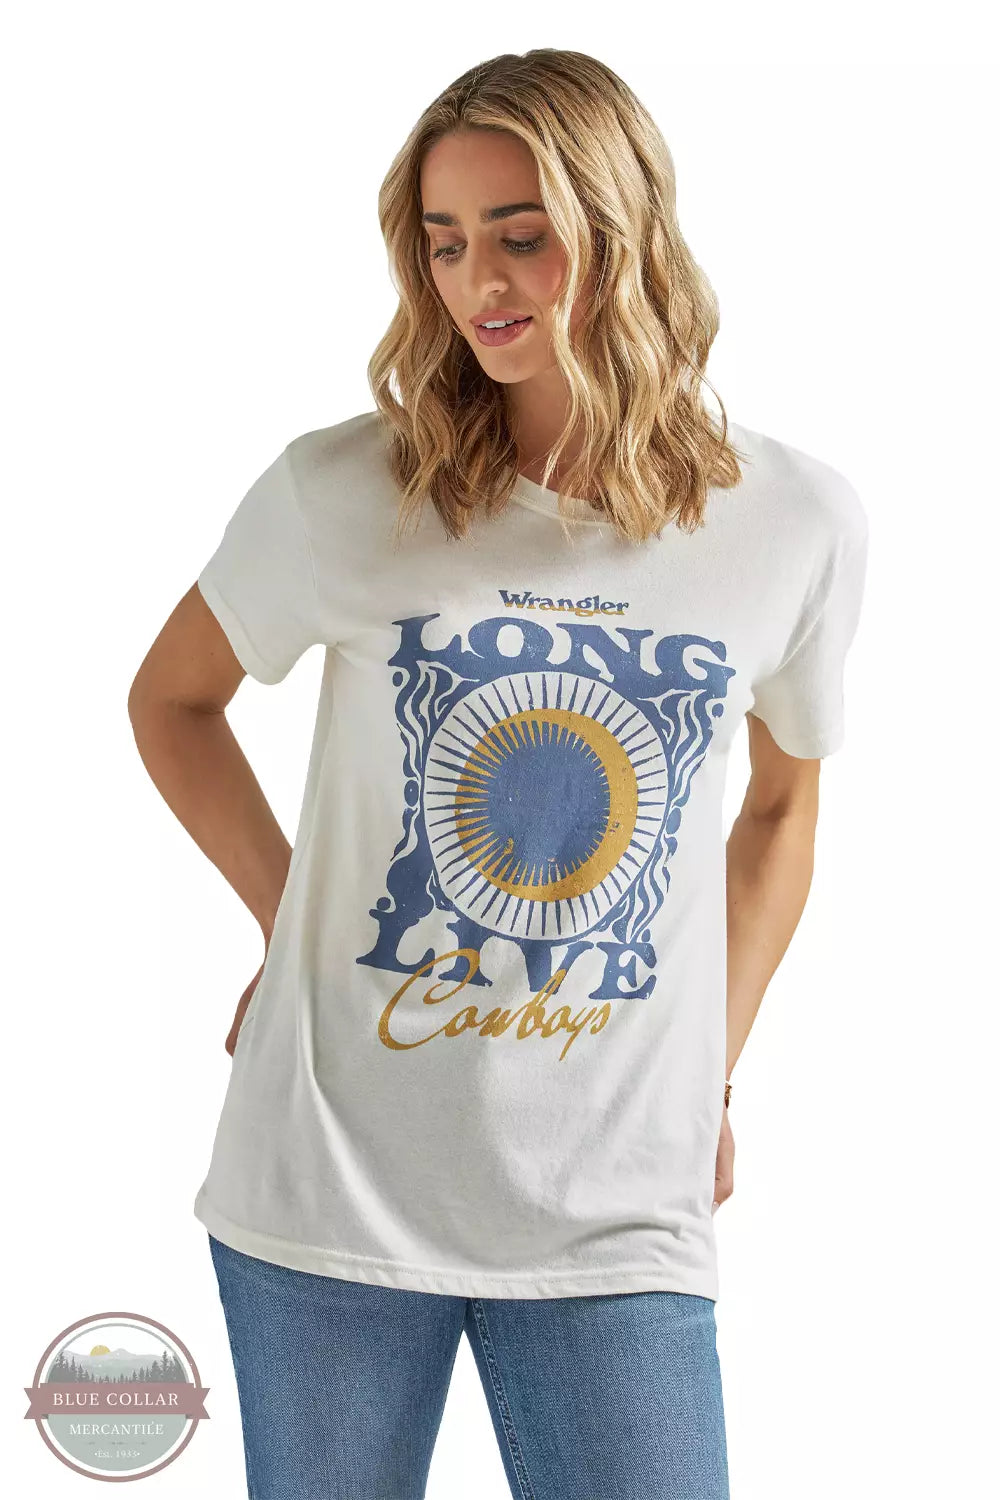 Wrangler 112339528 Long Live Cowboys T-Shirt in White Front View